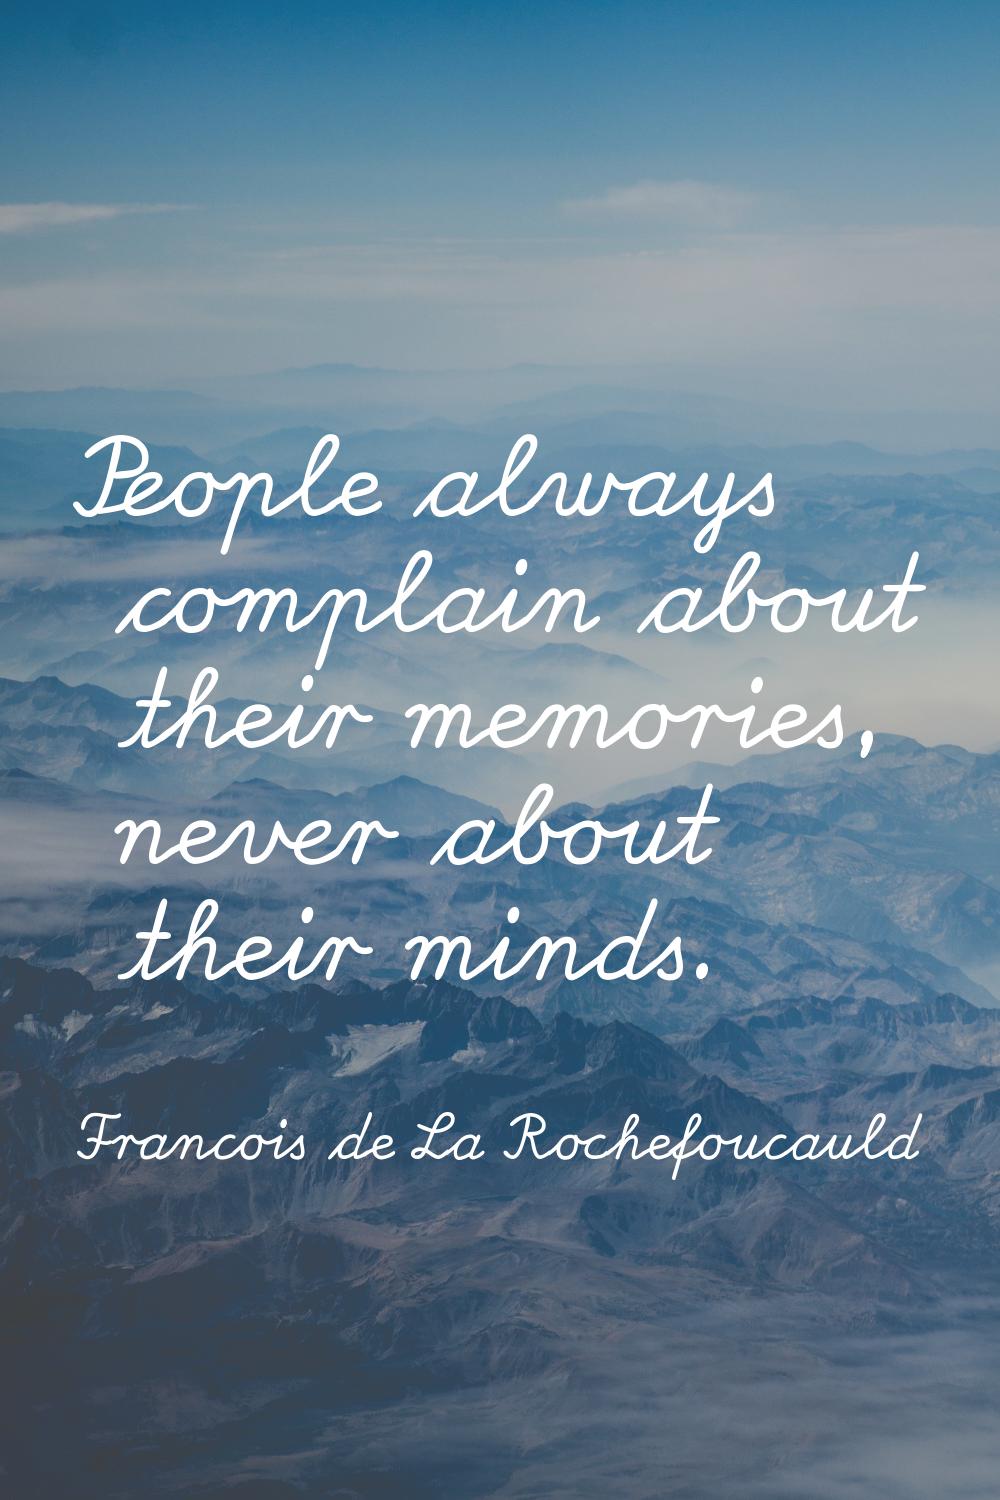 People always complain about their memories, never about their minds.